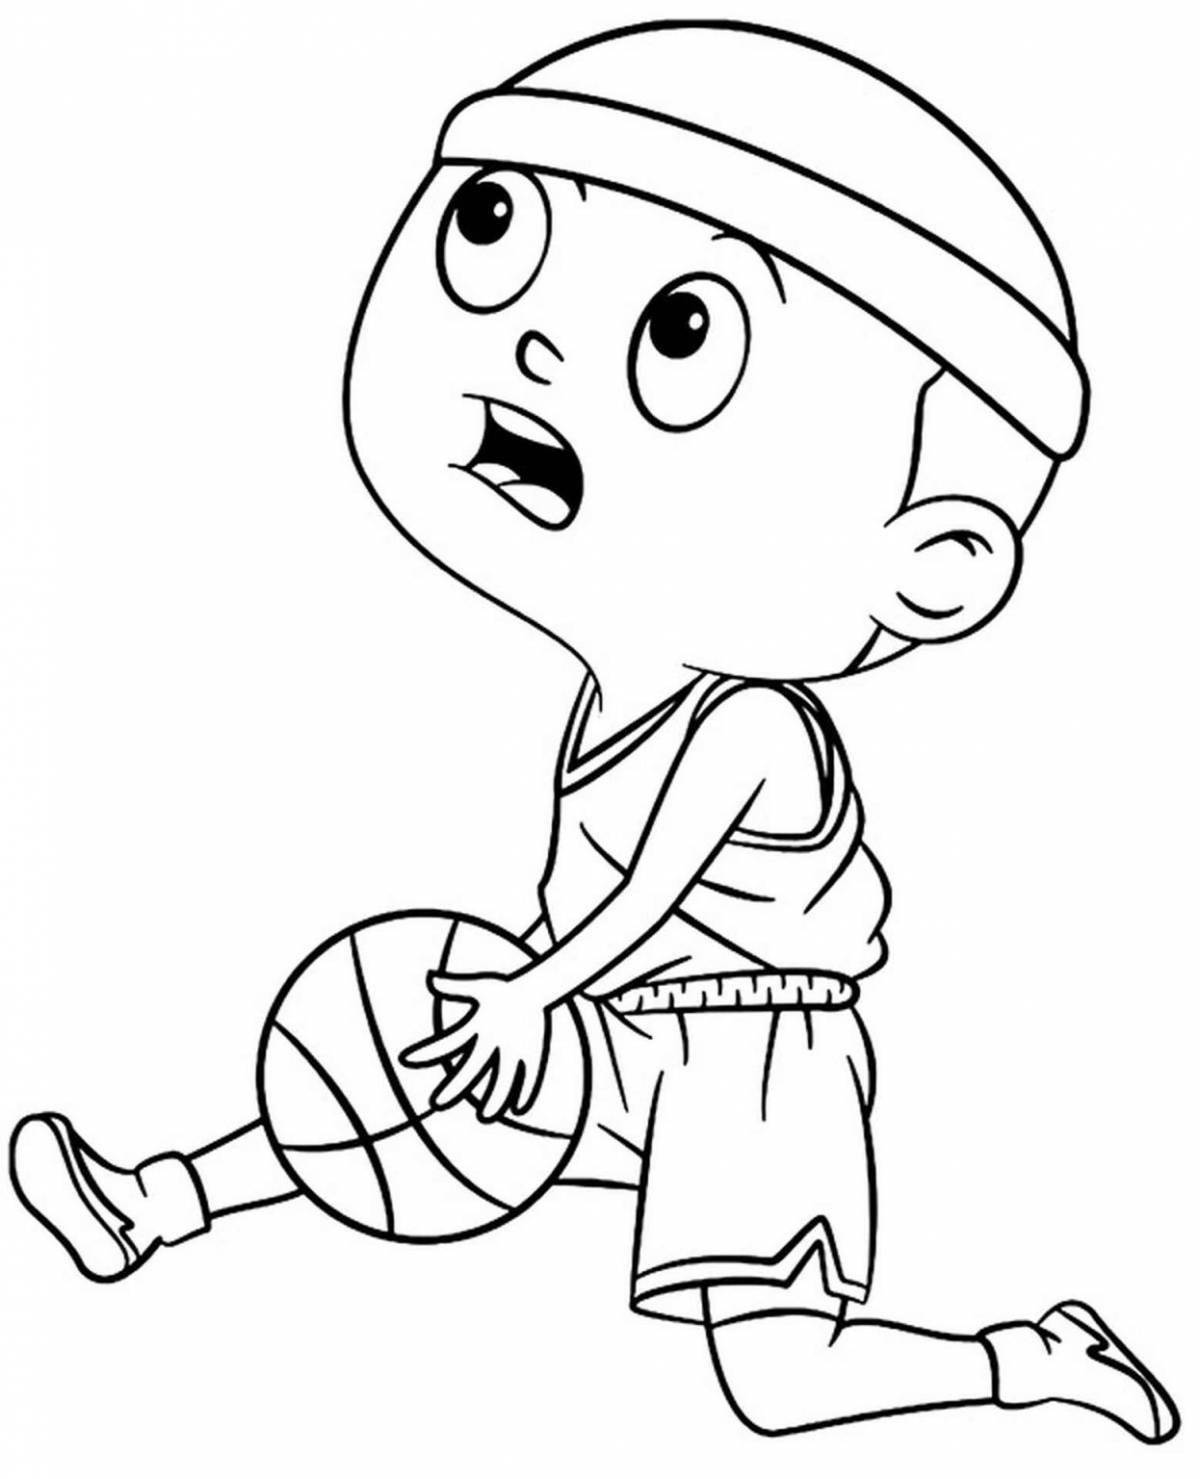 Coloring page energetic sportsmen for kids